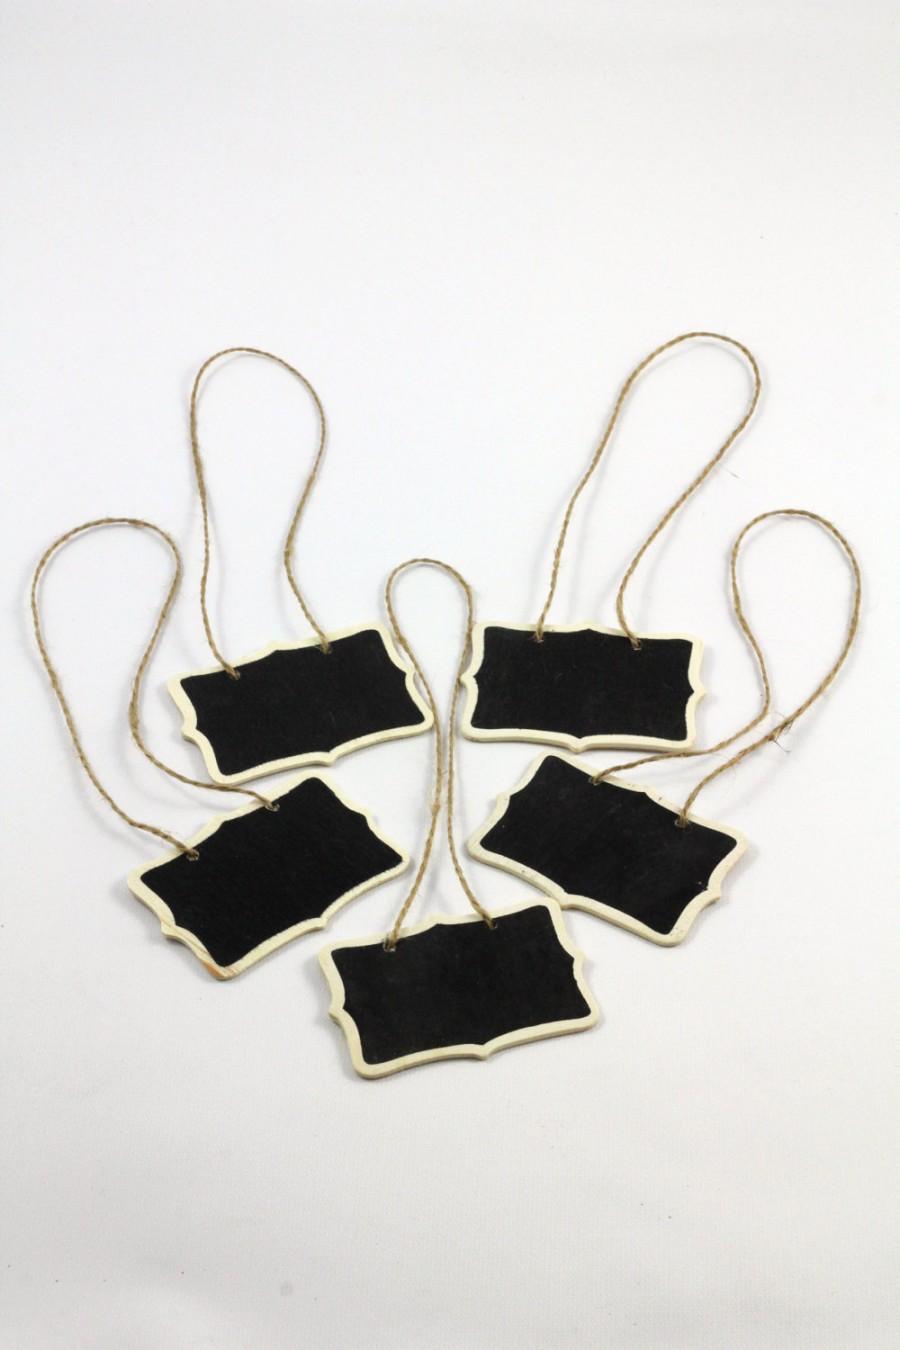 Hochzeit - SALE - Set of 5  - Mini Chalkboard Hanging Tags - Cottage Chic - Package embellishment  - Gift Tags Favor Tags - DearSeed